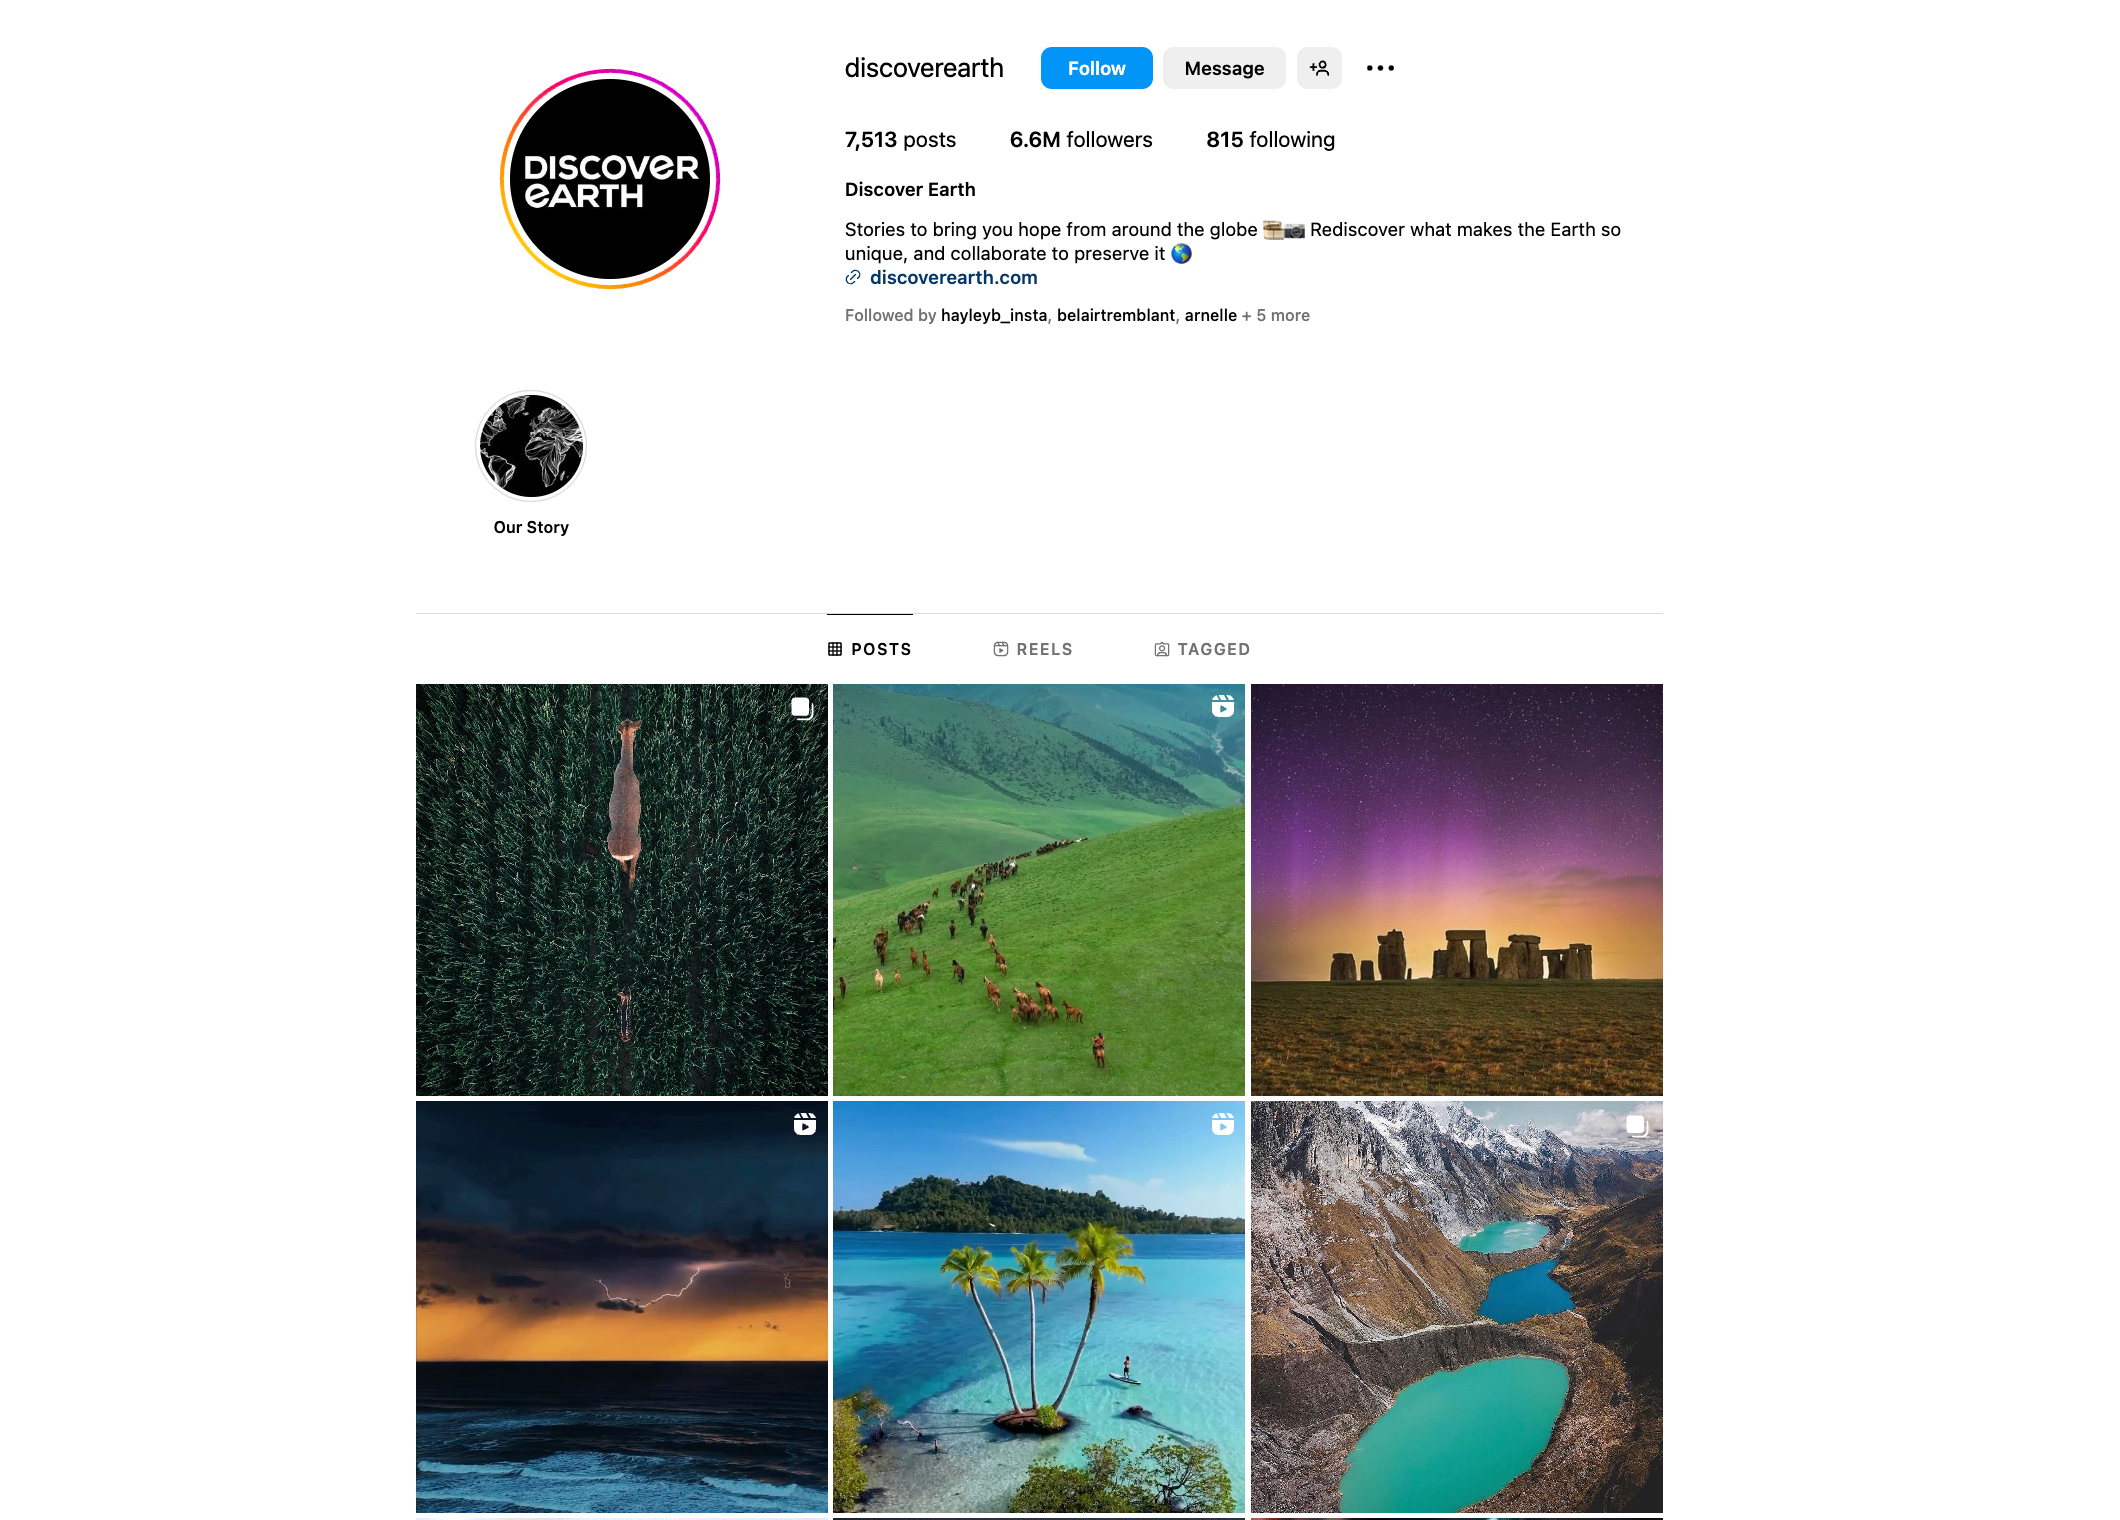 Instagram bio page for Discover Earth featuring other brand's photos, exposing them to new followers